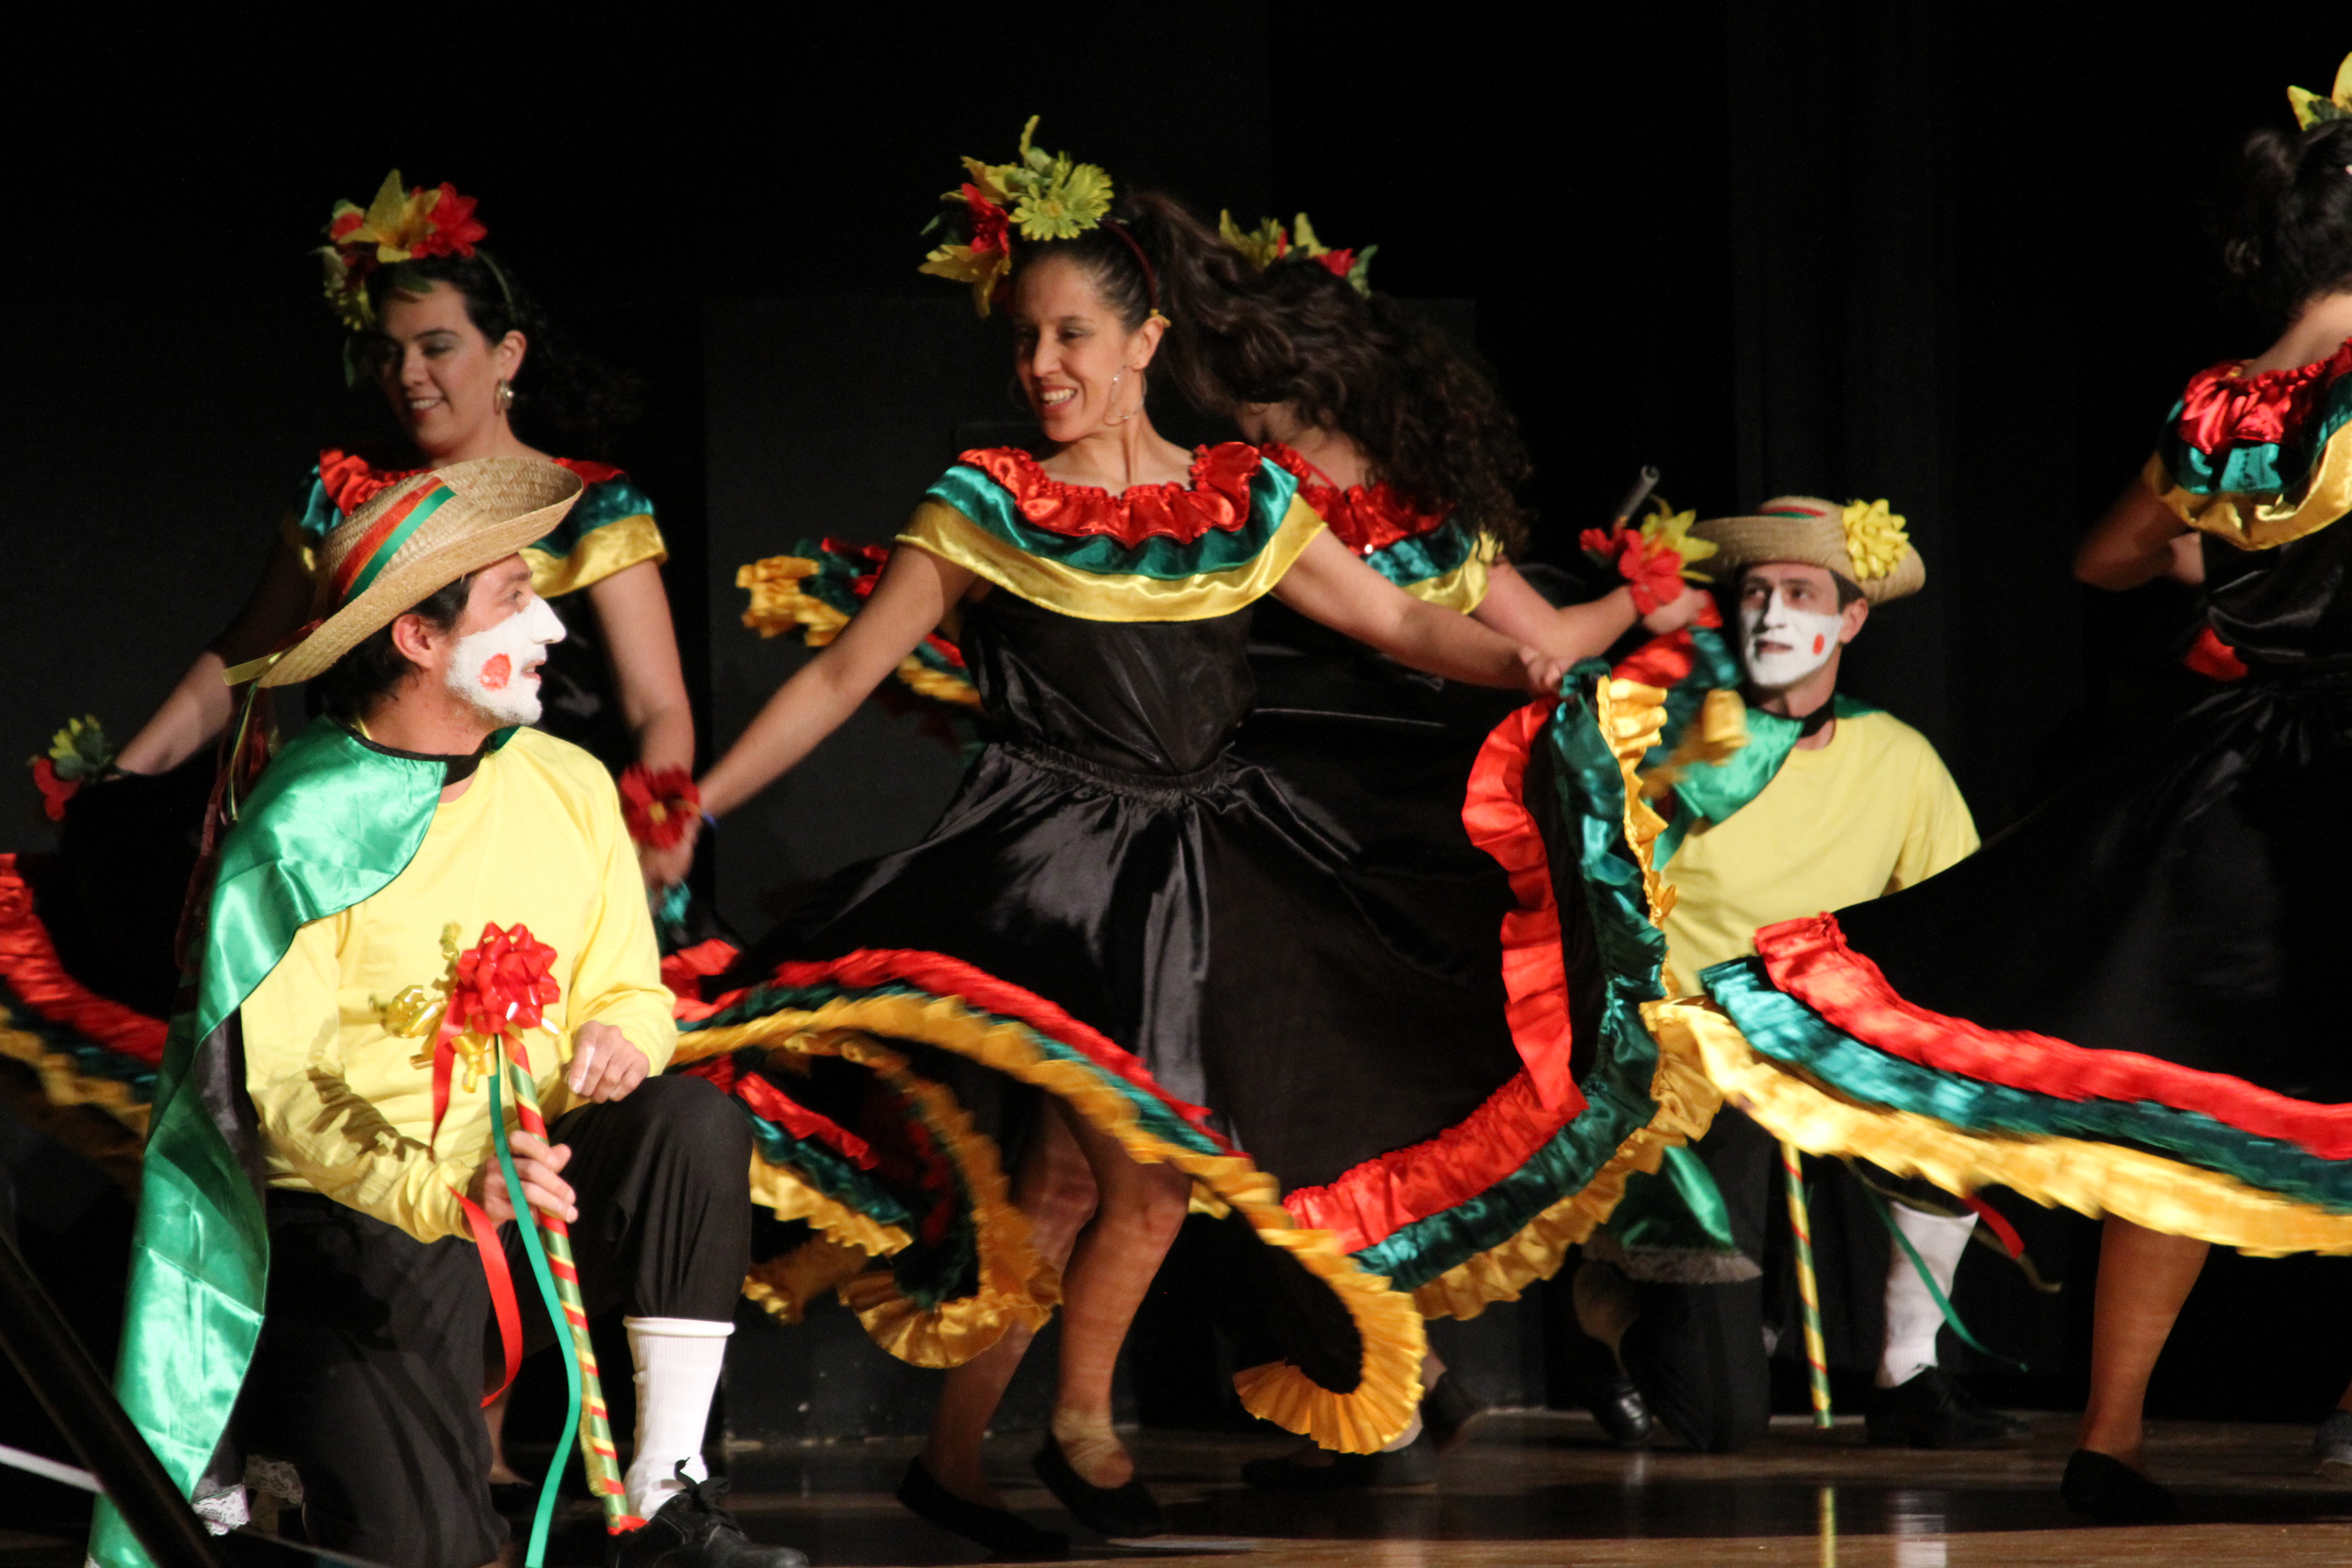 Students dancing on stage at a cultural club performance